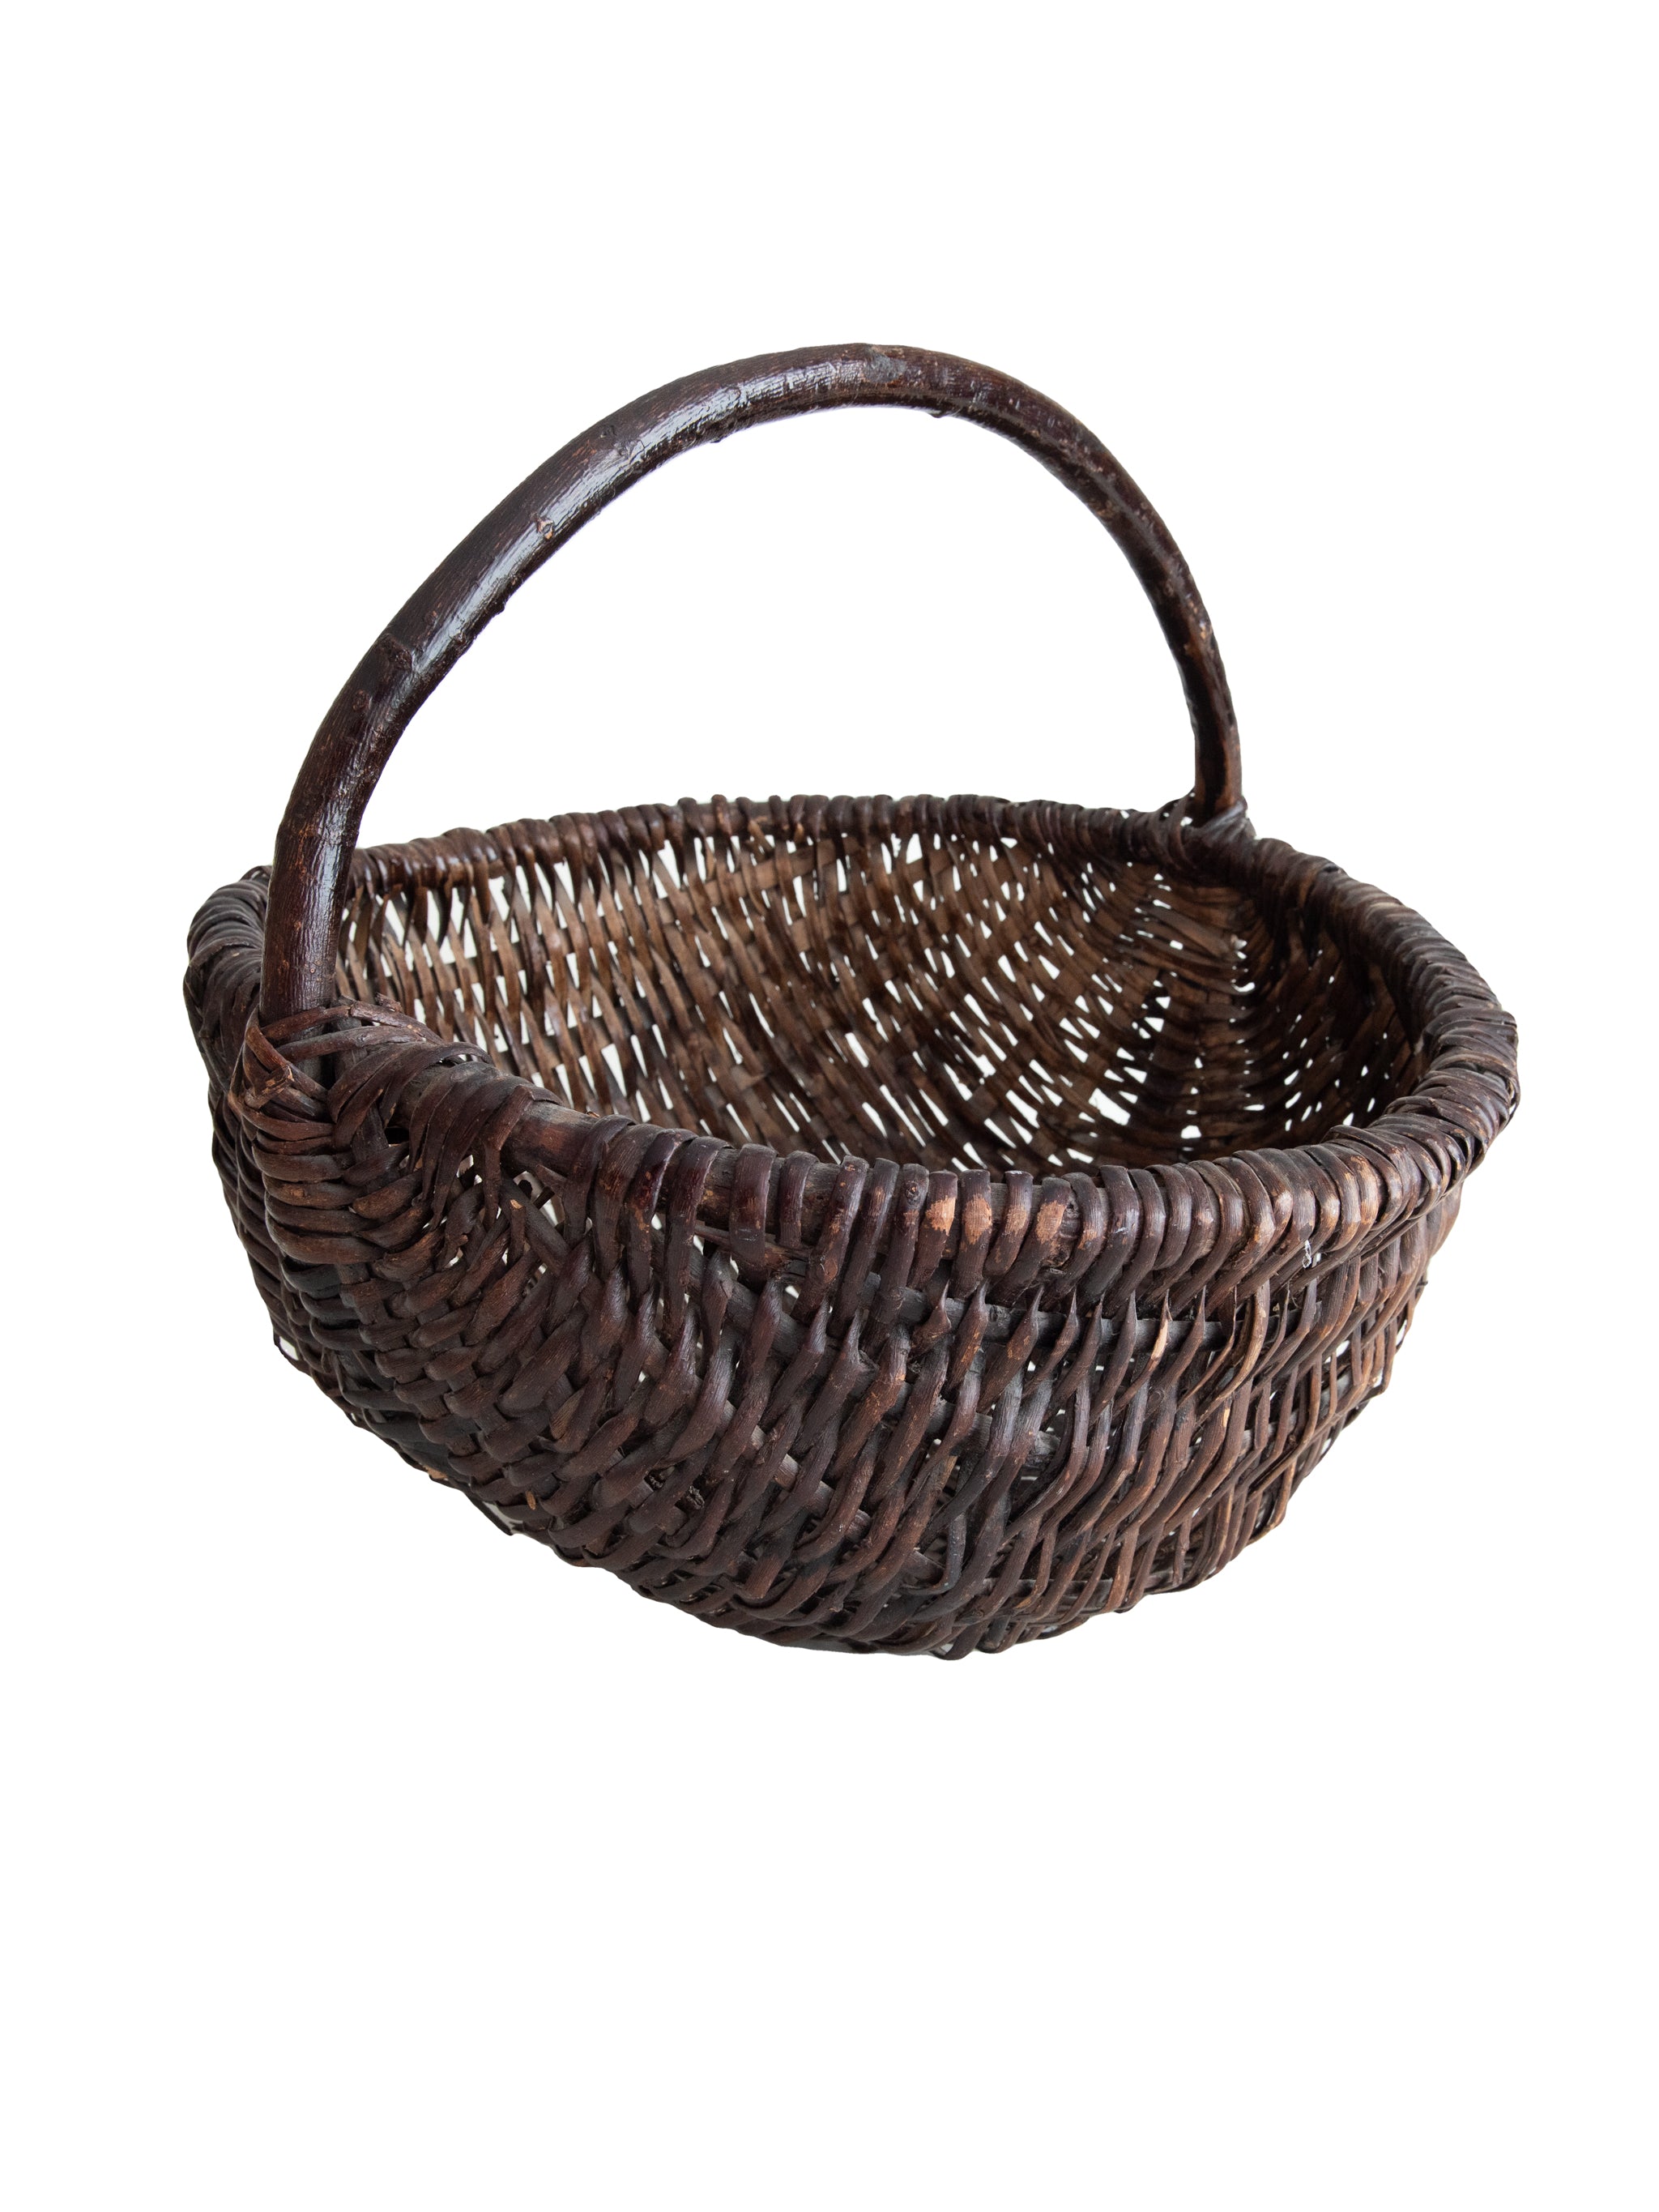 Shop the Vintage 1920s Hand Woven Willow Gathering Basket at